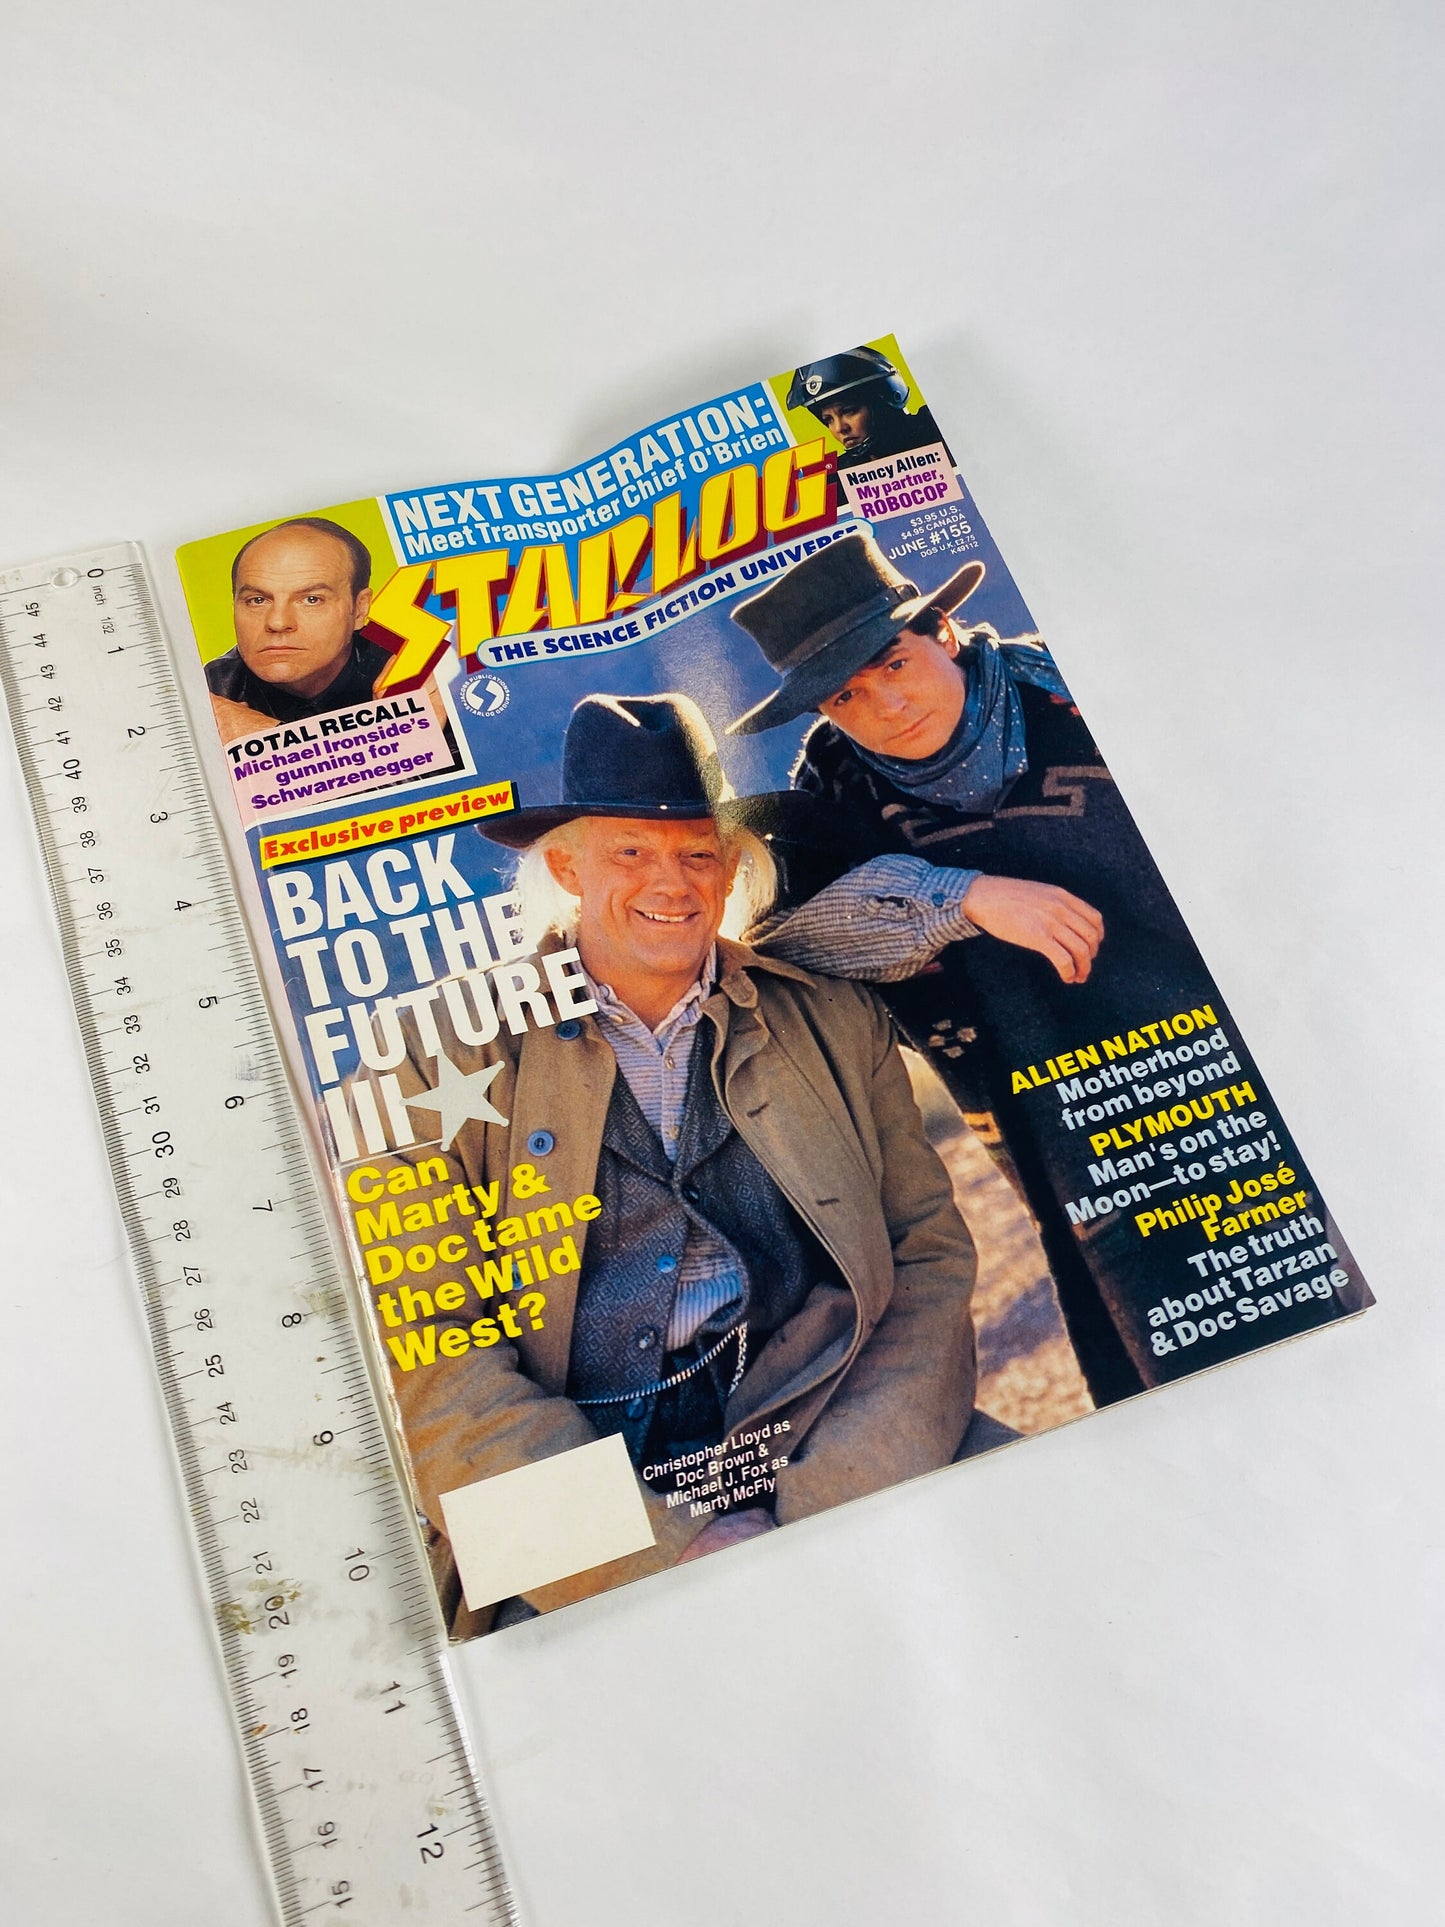 1990 Back to the Future III Star Trek Marty & Doc vintage magazine Starlog scifi movie photos stories decor college bedroom posters